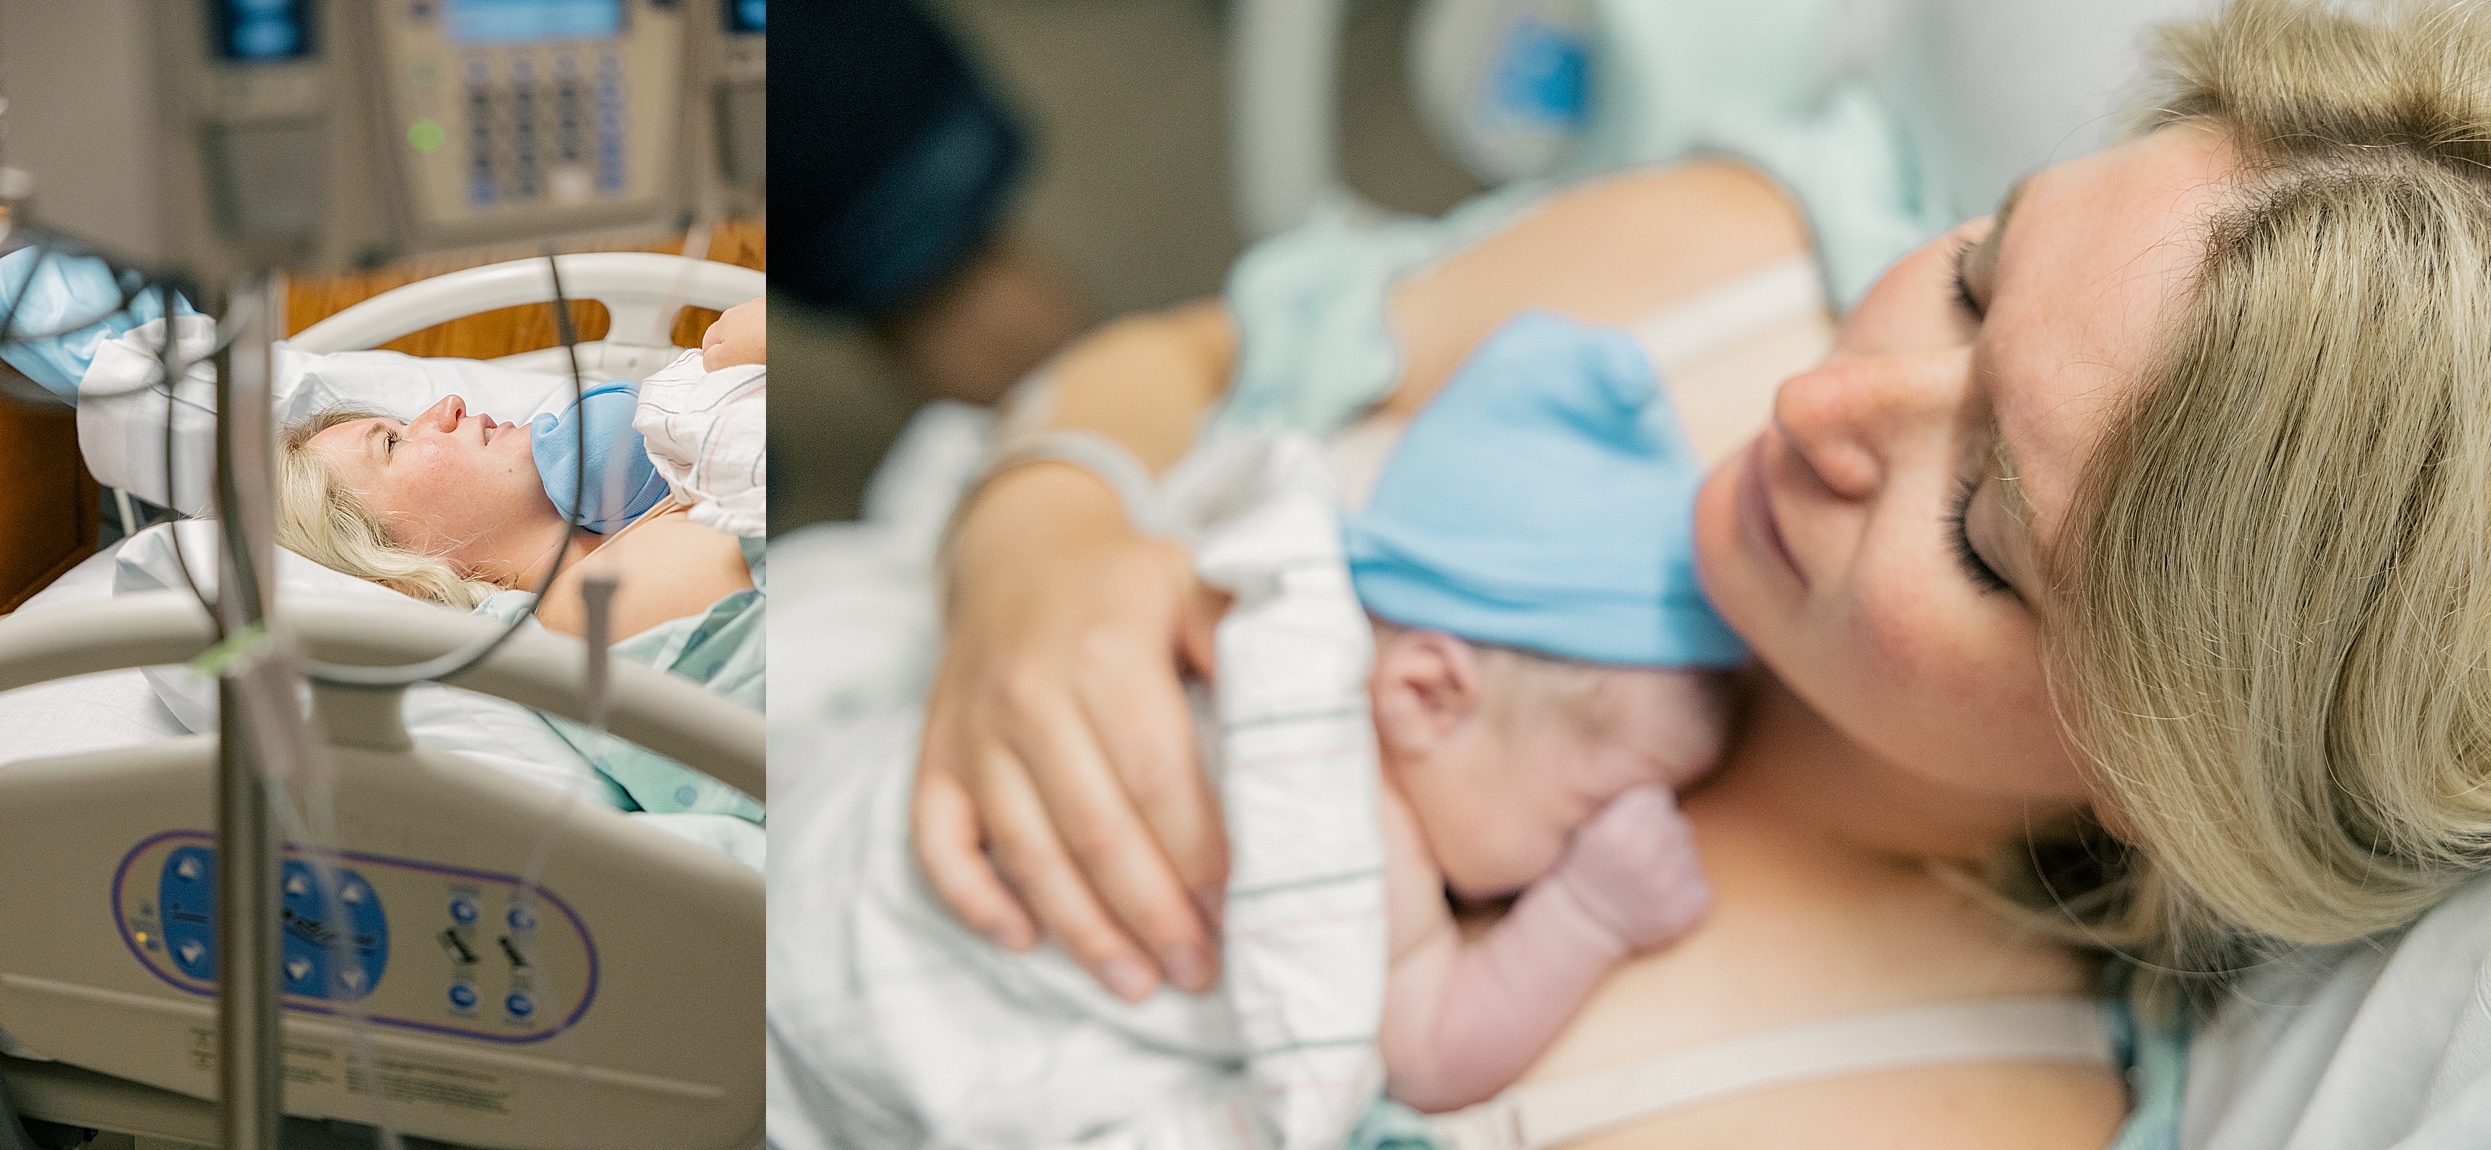 What to pack in your hospital bag when having a baby, tips from indianapolis newborn photographer Brittney Lear Photography, mother holding newborn baby in St. Vincent Women's hospital bed